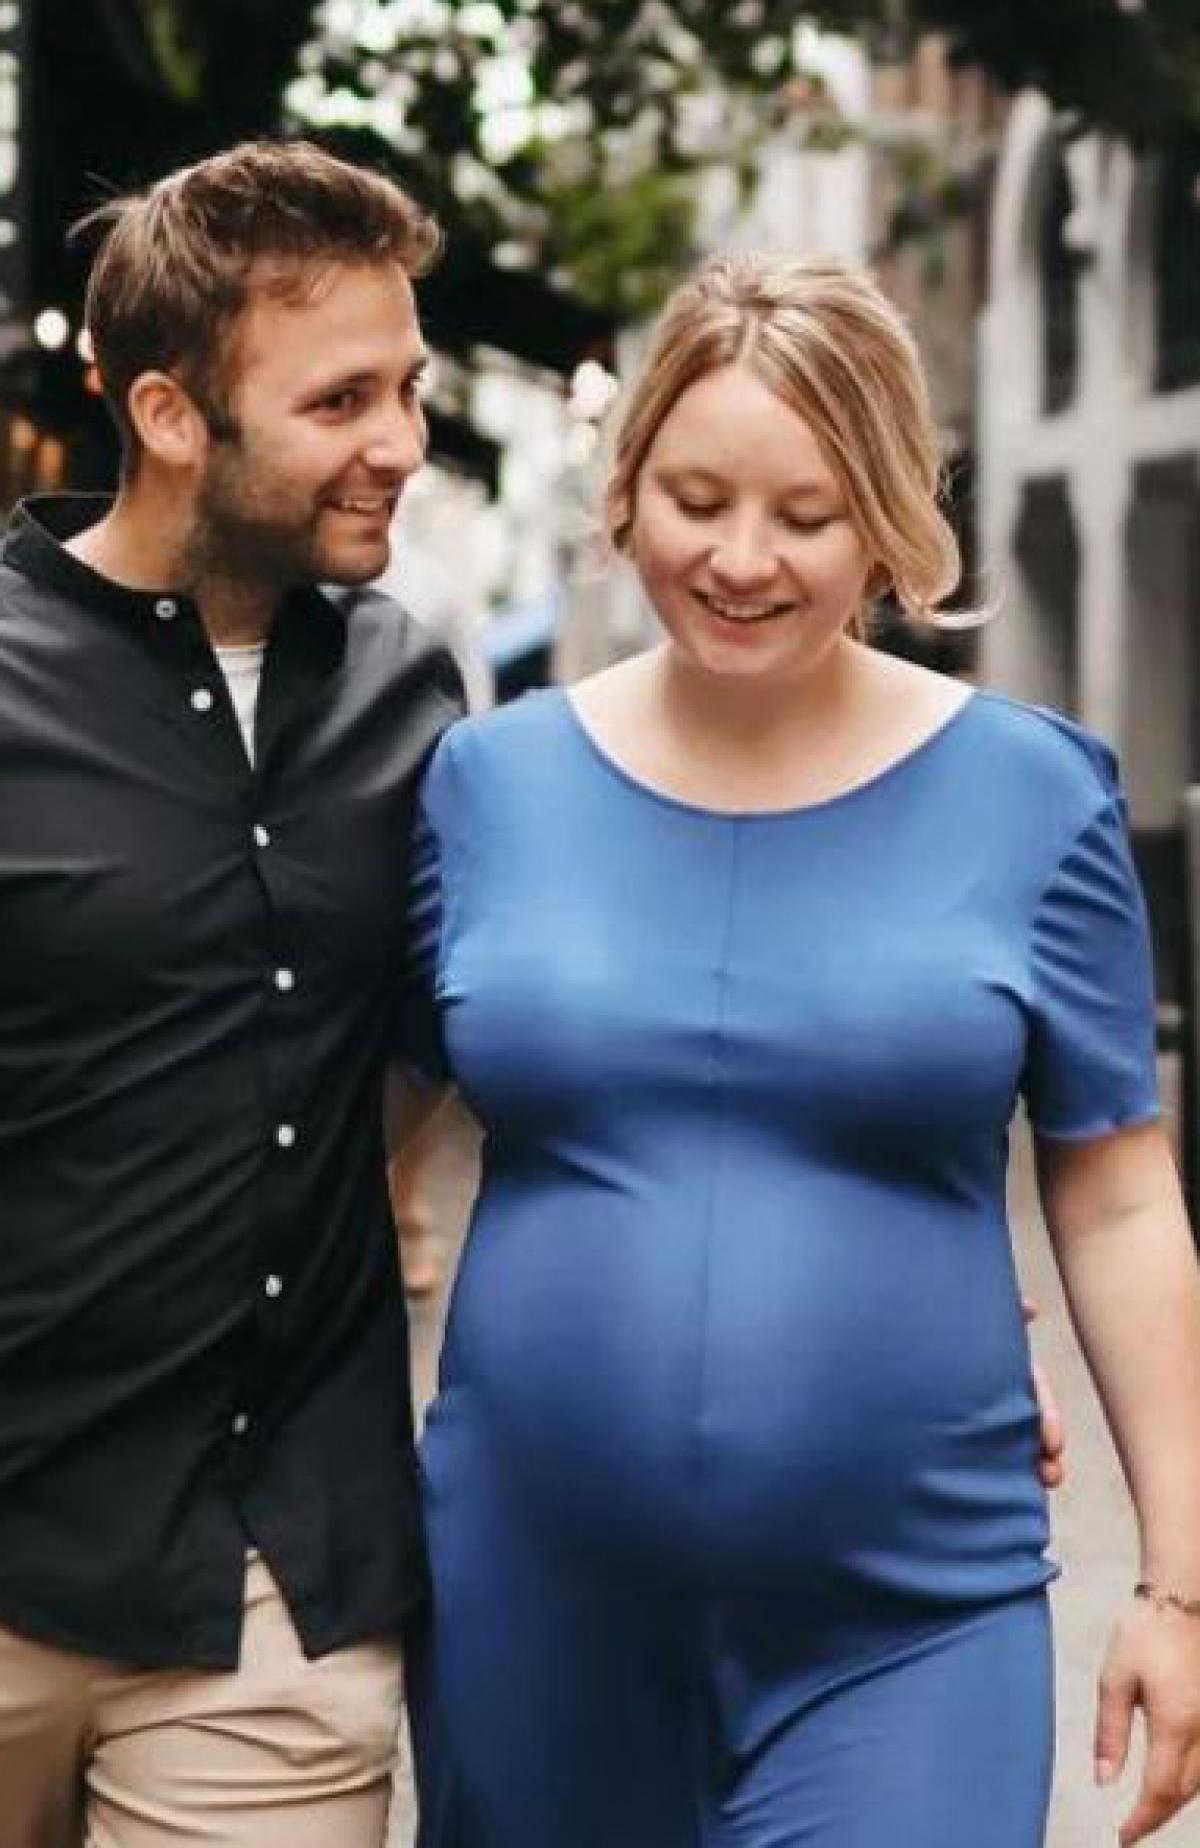 Jill, 28, is the mother of baby star Ellis and is pregnant with Rainbow's baby